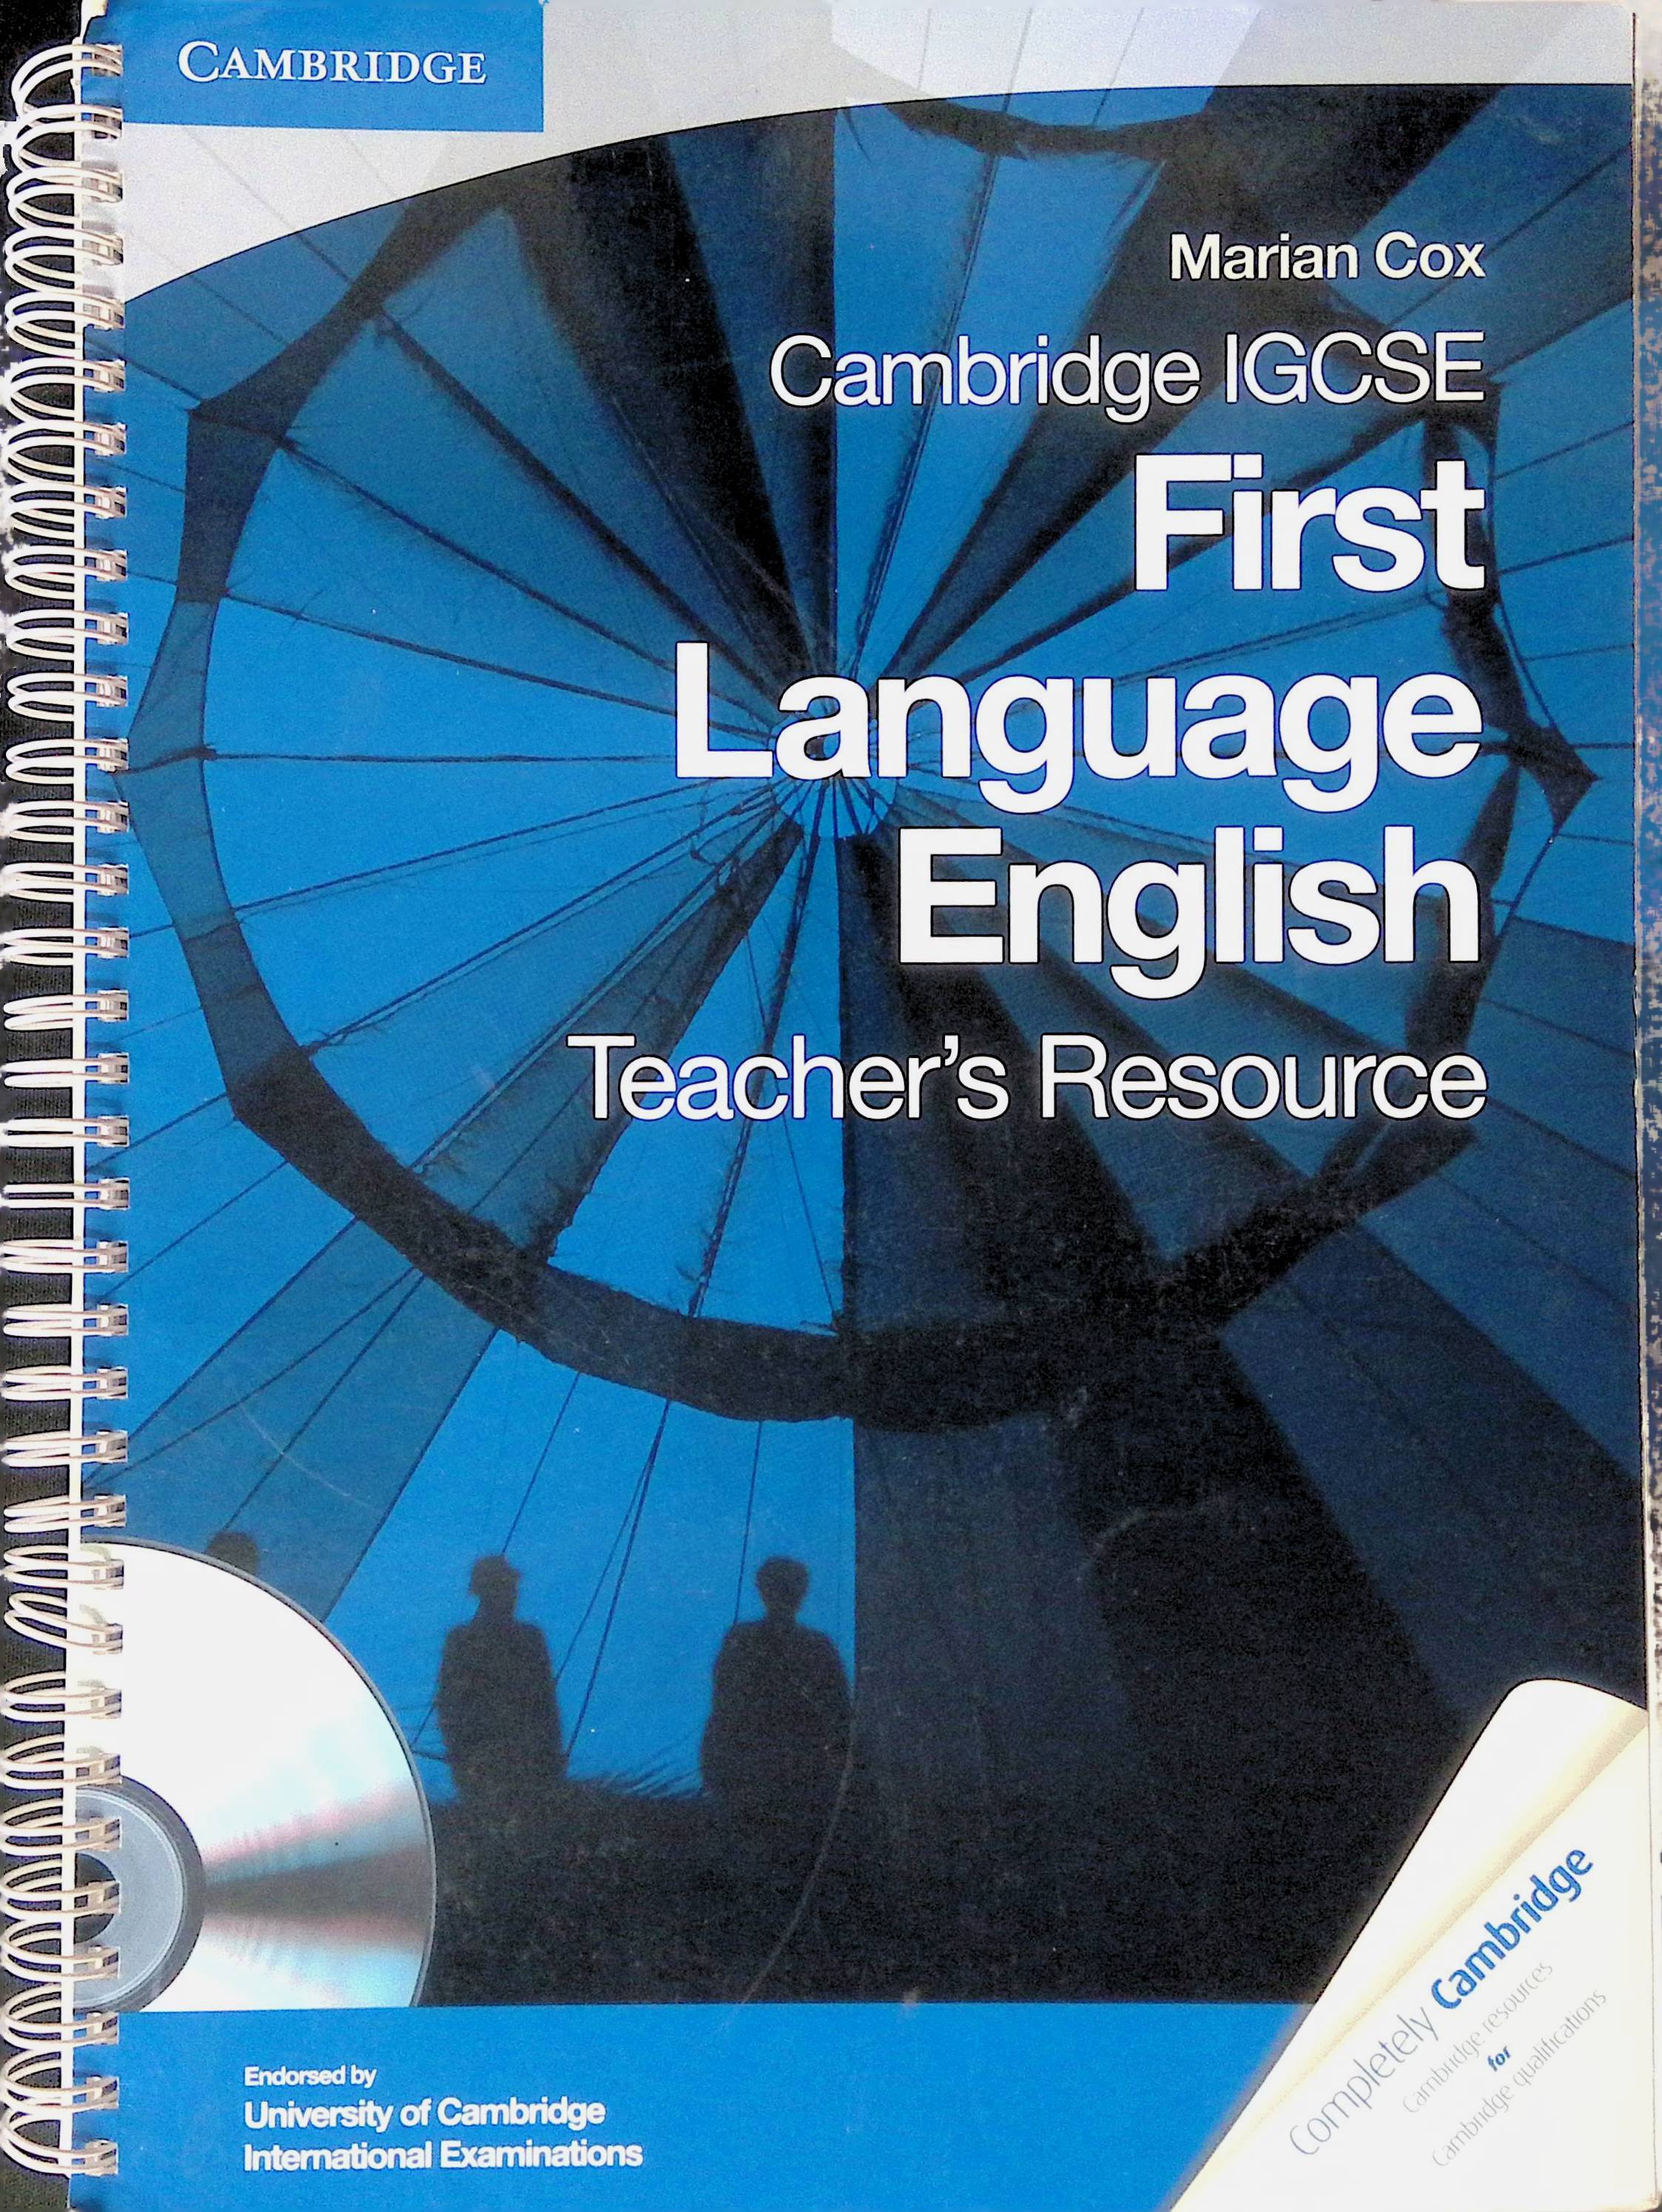 Cambridge teachers book. First language teaching. Cambridge English for Scientists. Recycling Intermediate English. Teaching English book Cover.